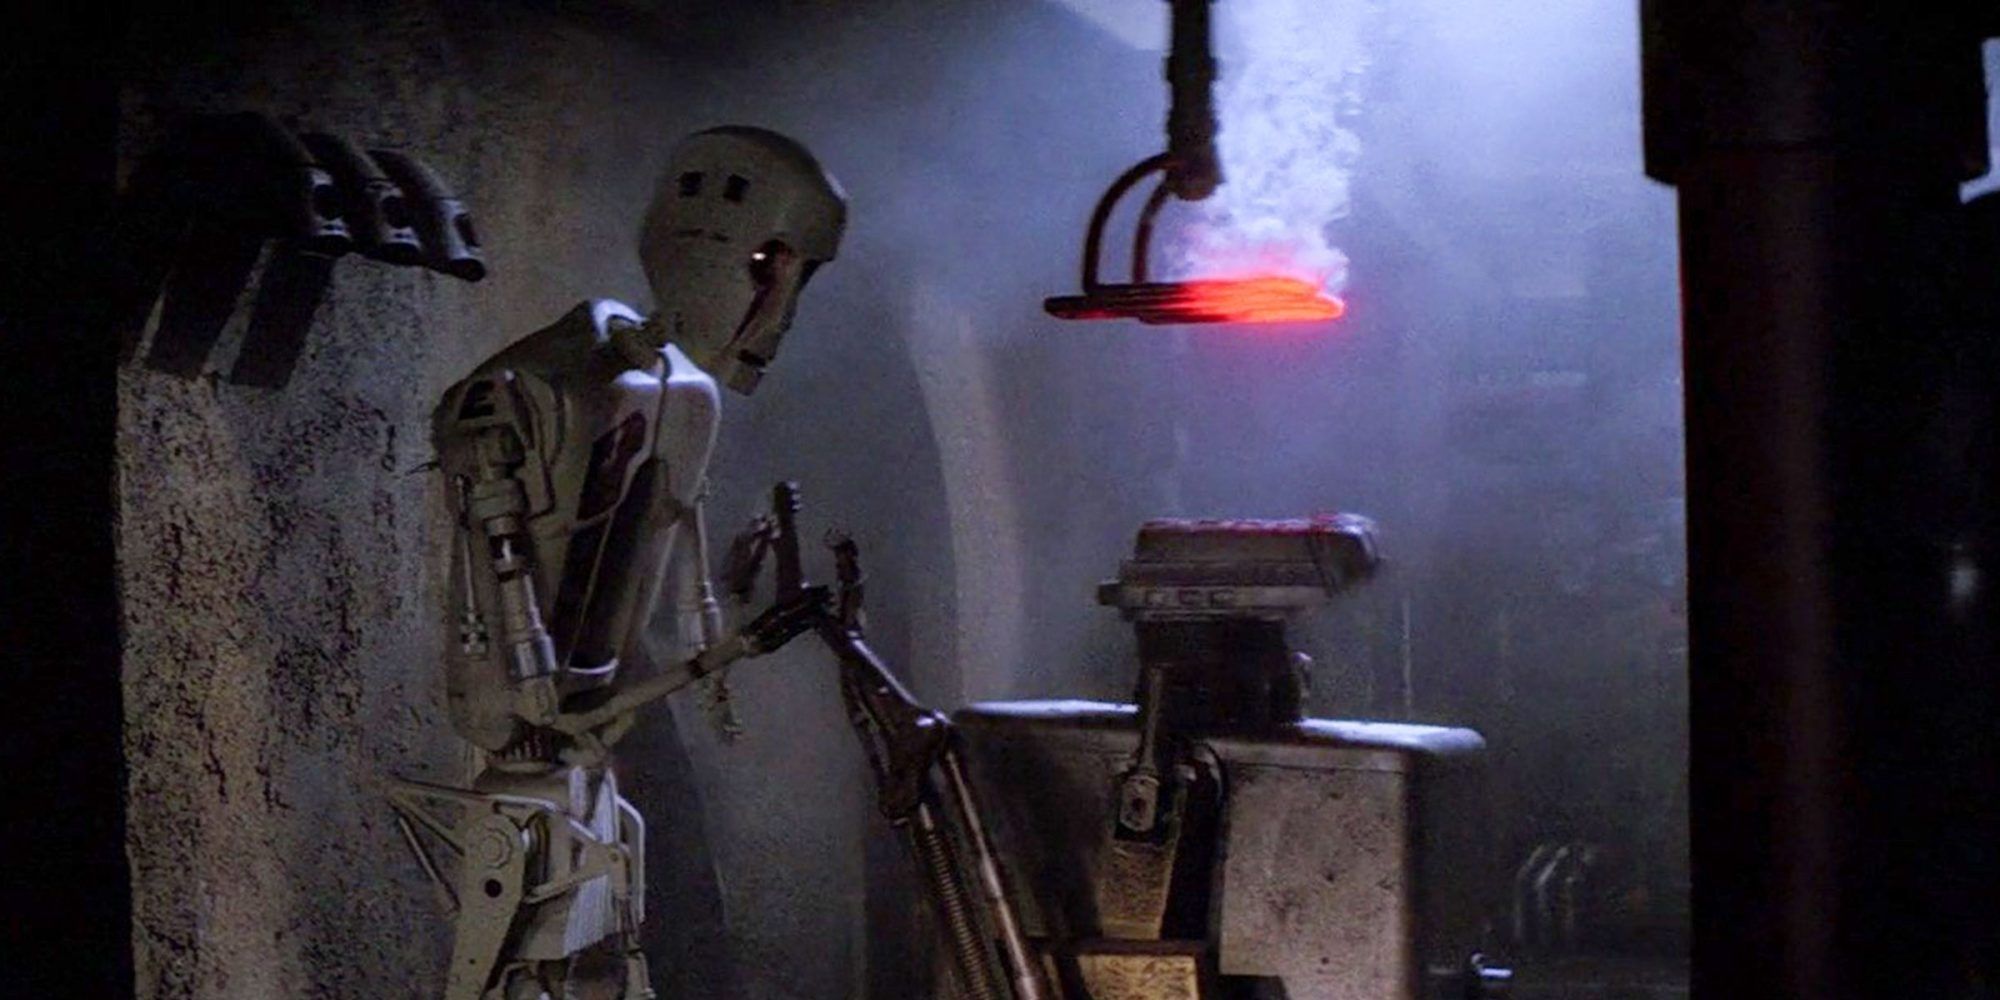 Image of the 8D8 Droid from Star Wars.